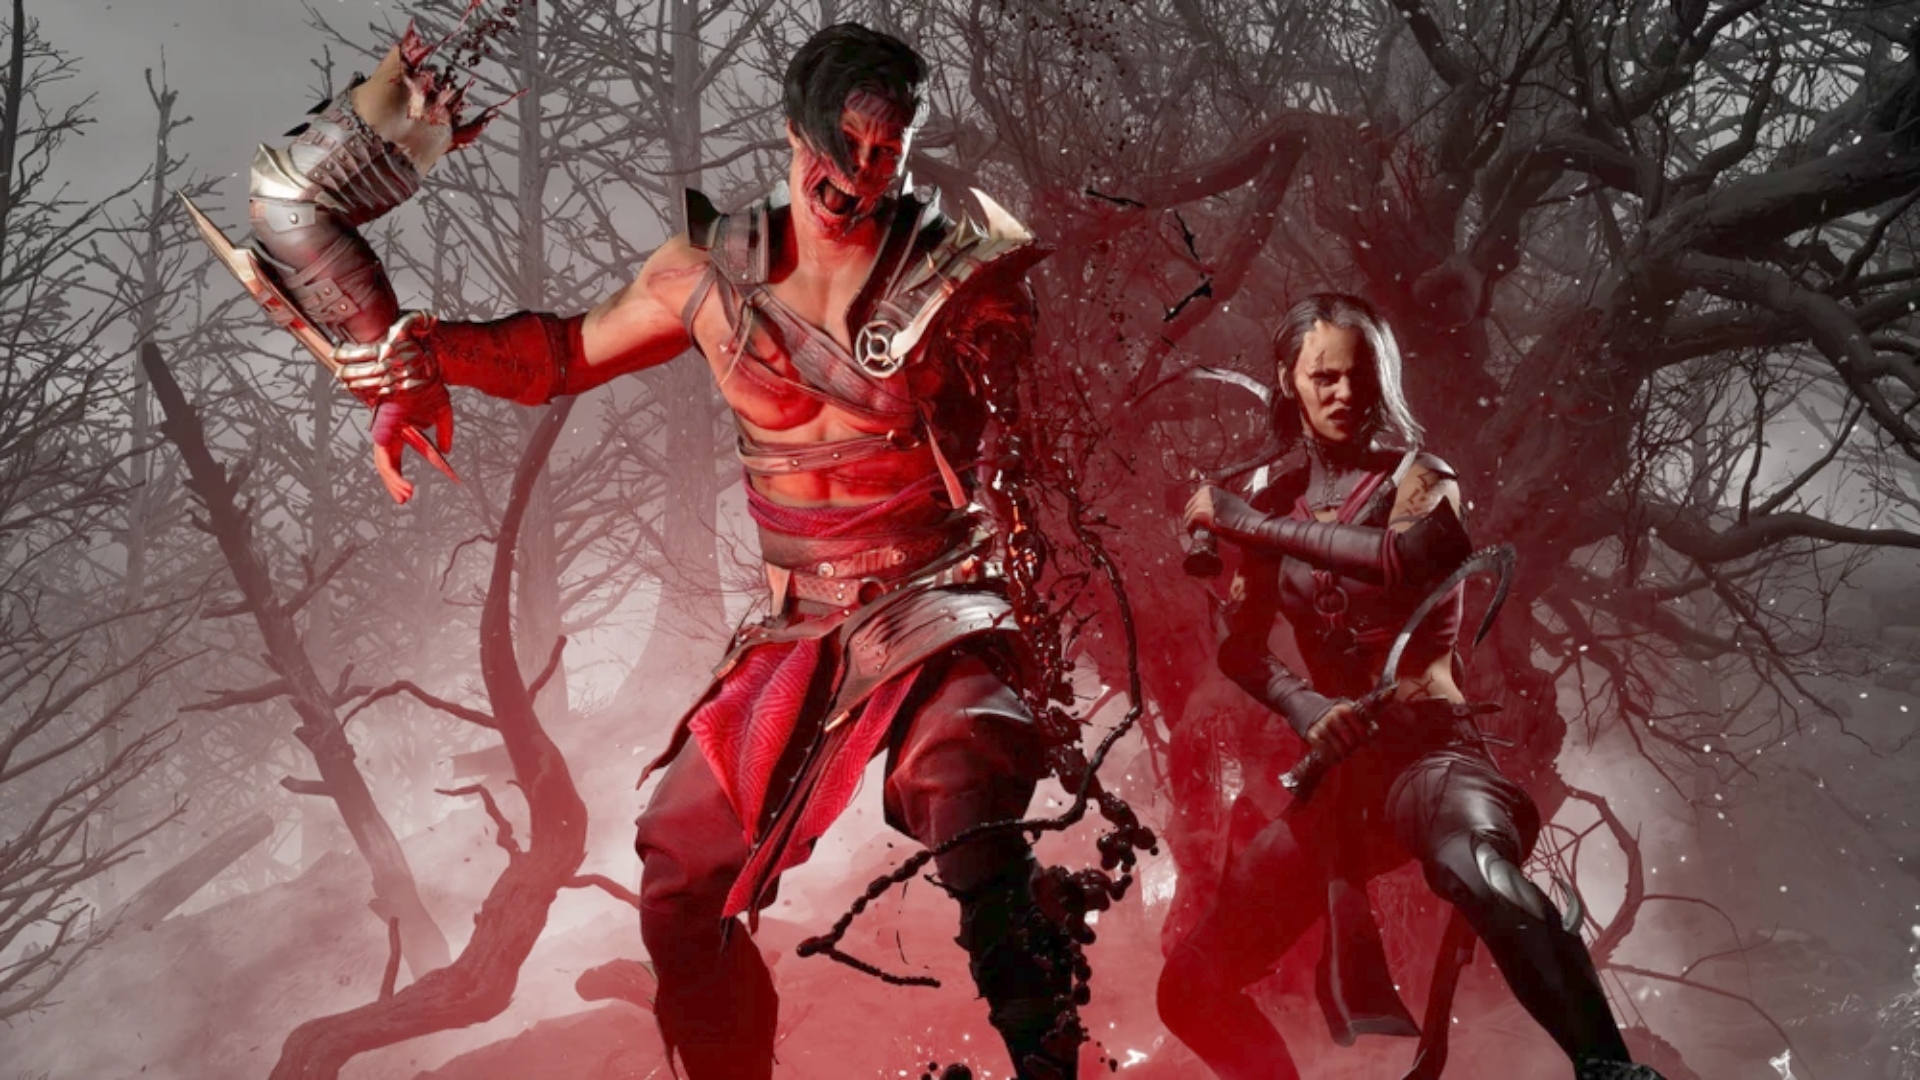 Mortal Kombat 1 characters – all confirmed fighters